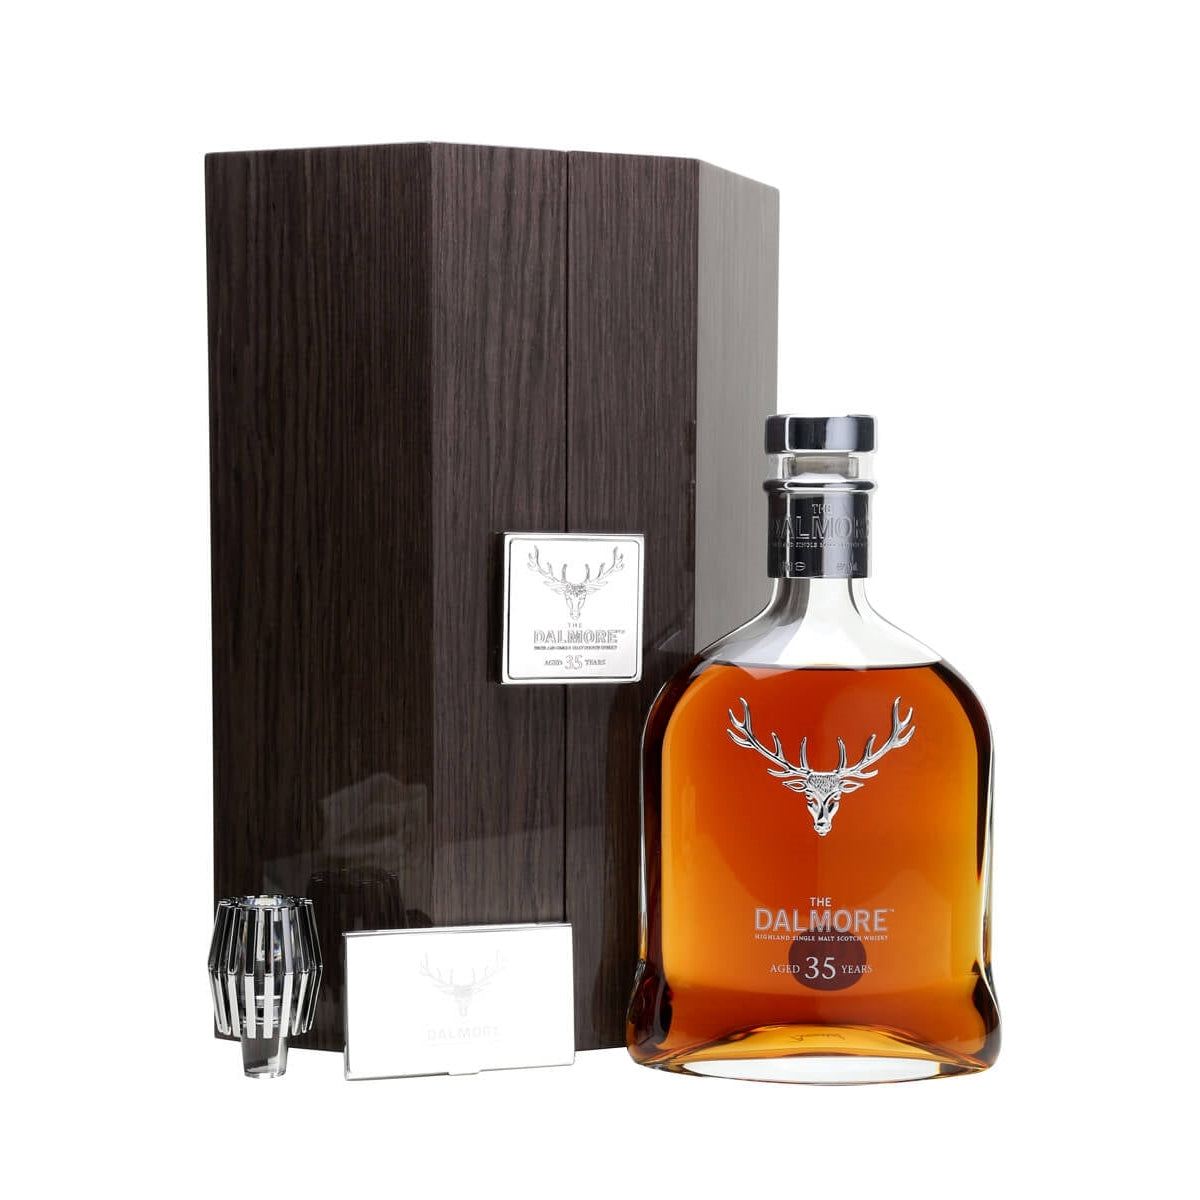 The Dalmore 35 Years Old Highland Single Malt Scotch Whisky 40% Vol. 0,7l in Giftbox